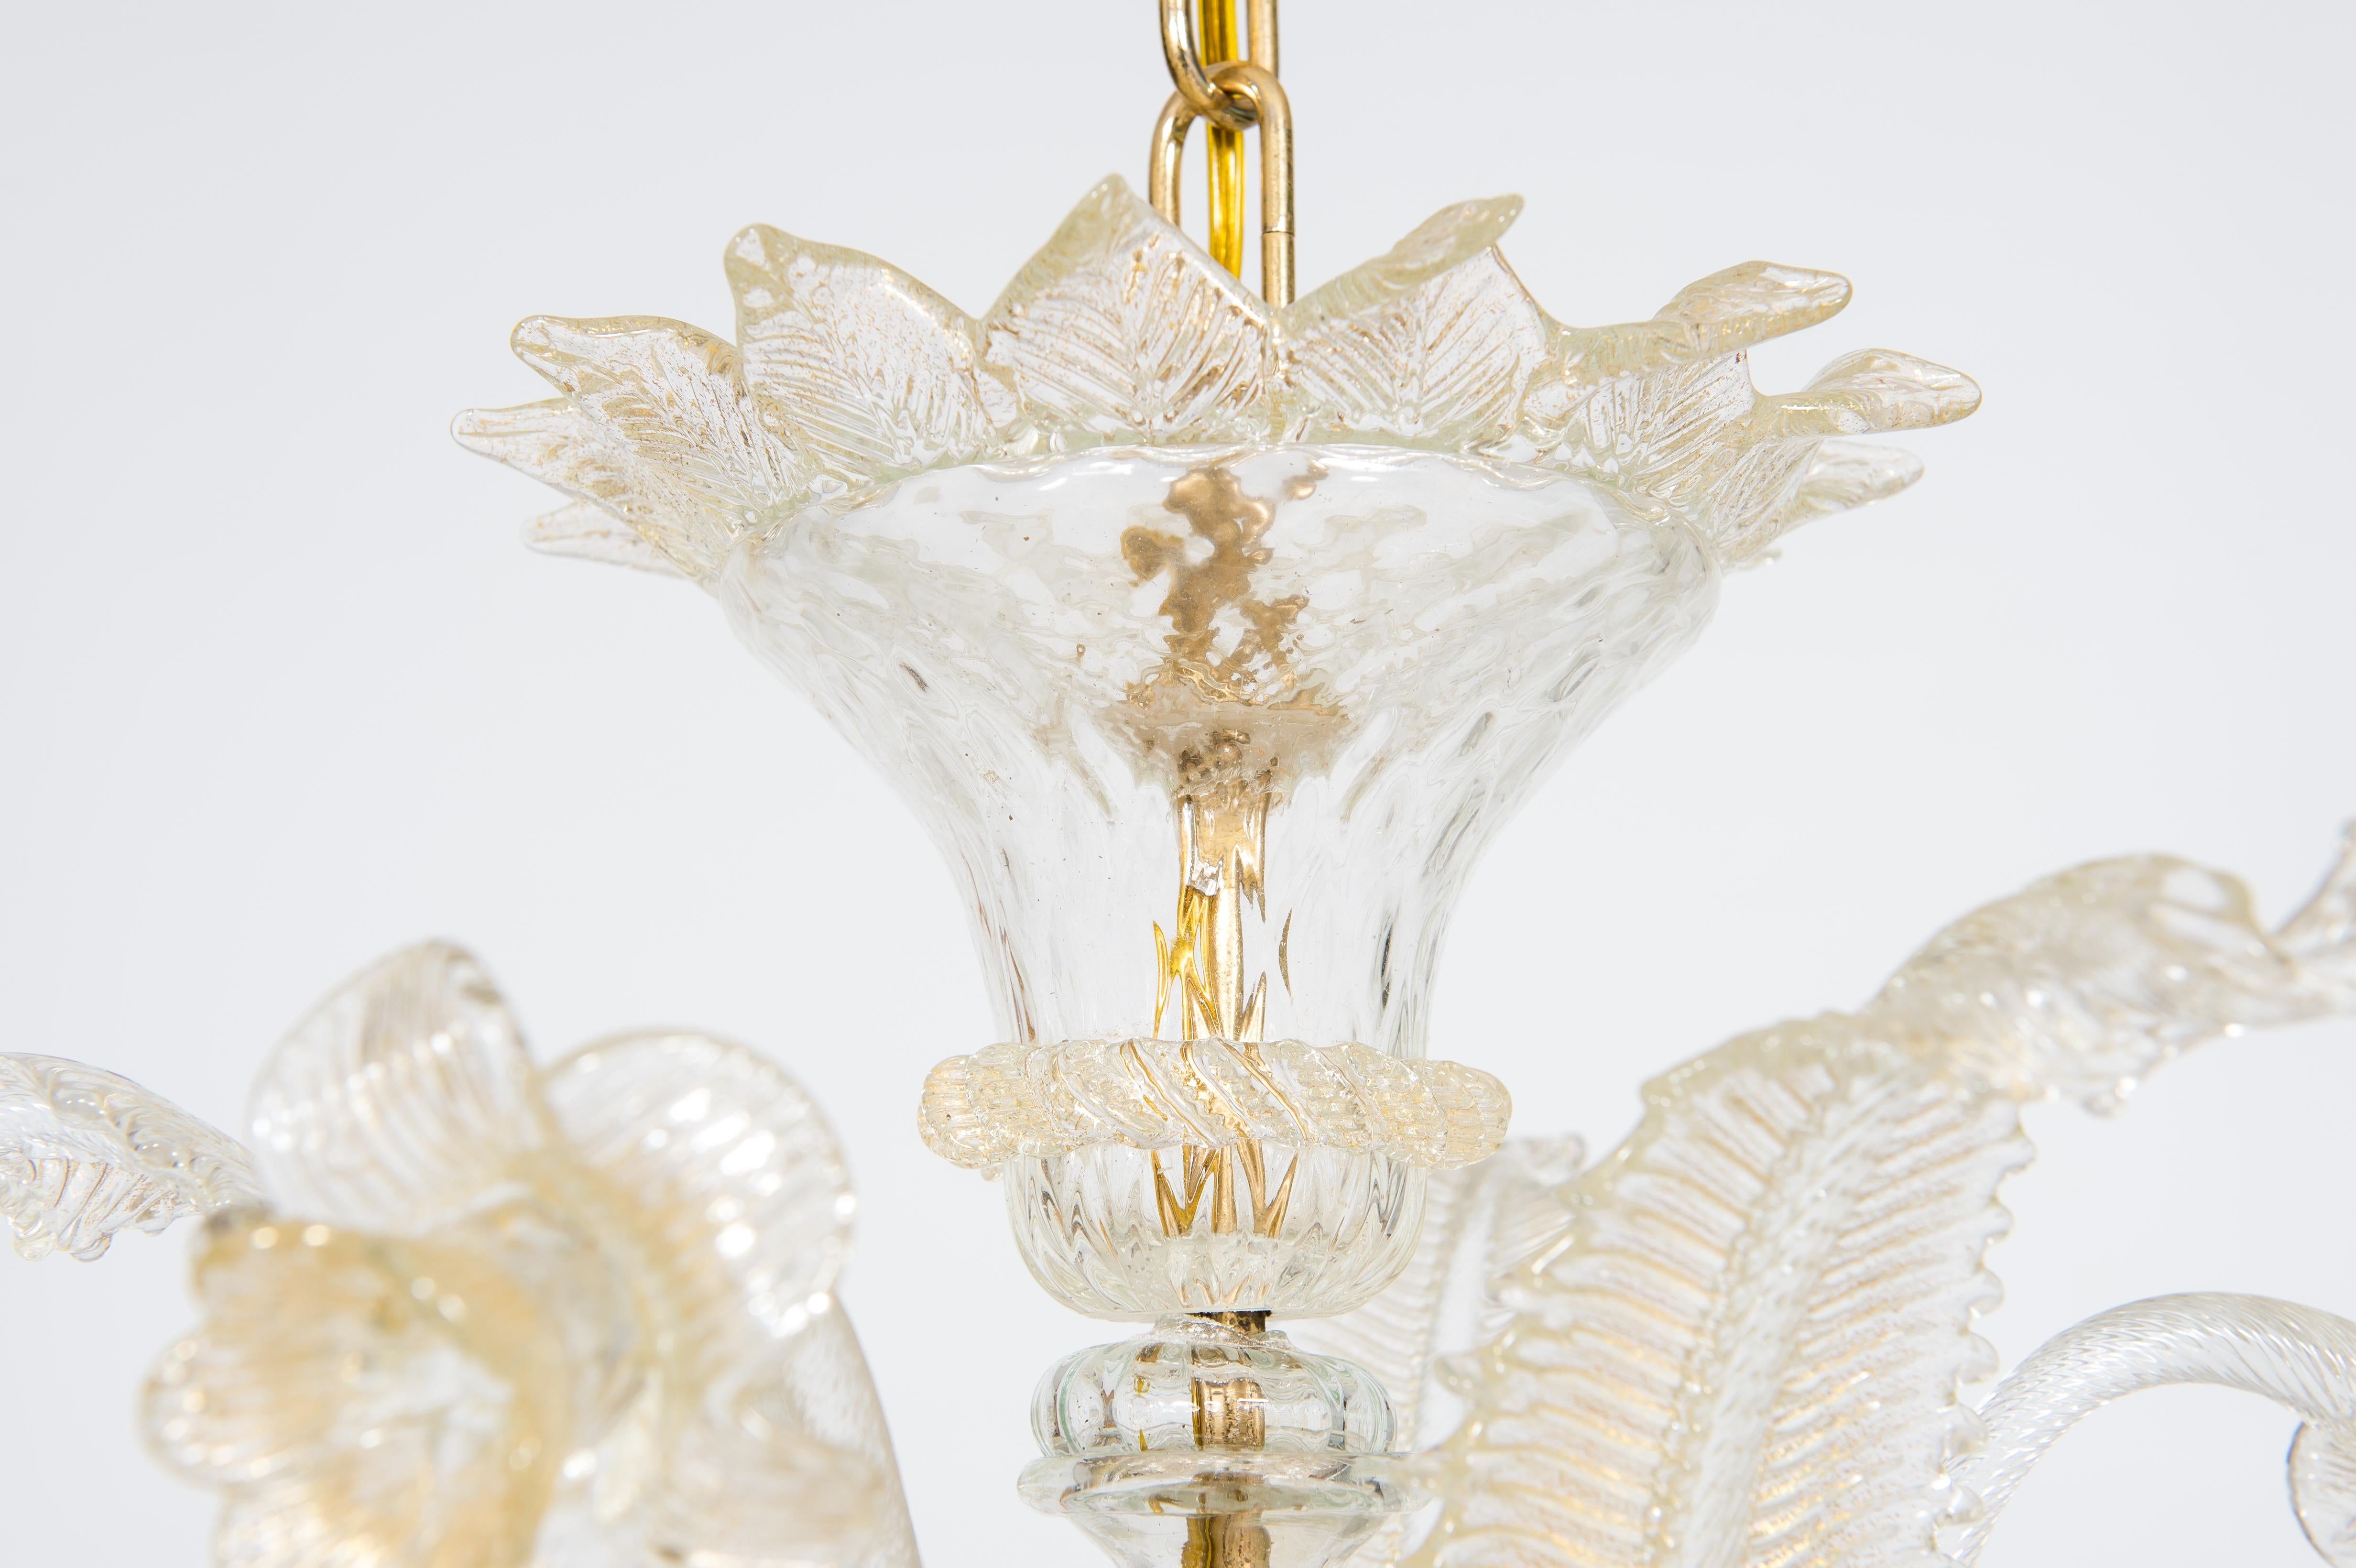 Floral Murano Glass Chandelier with “Riga Dritta” Decorations, 20th Century 6